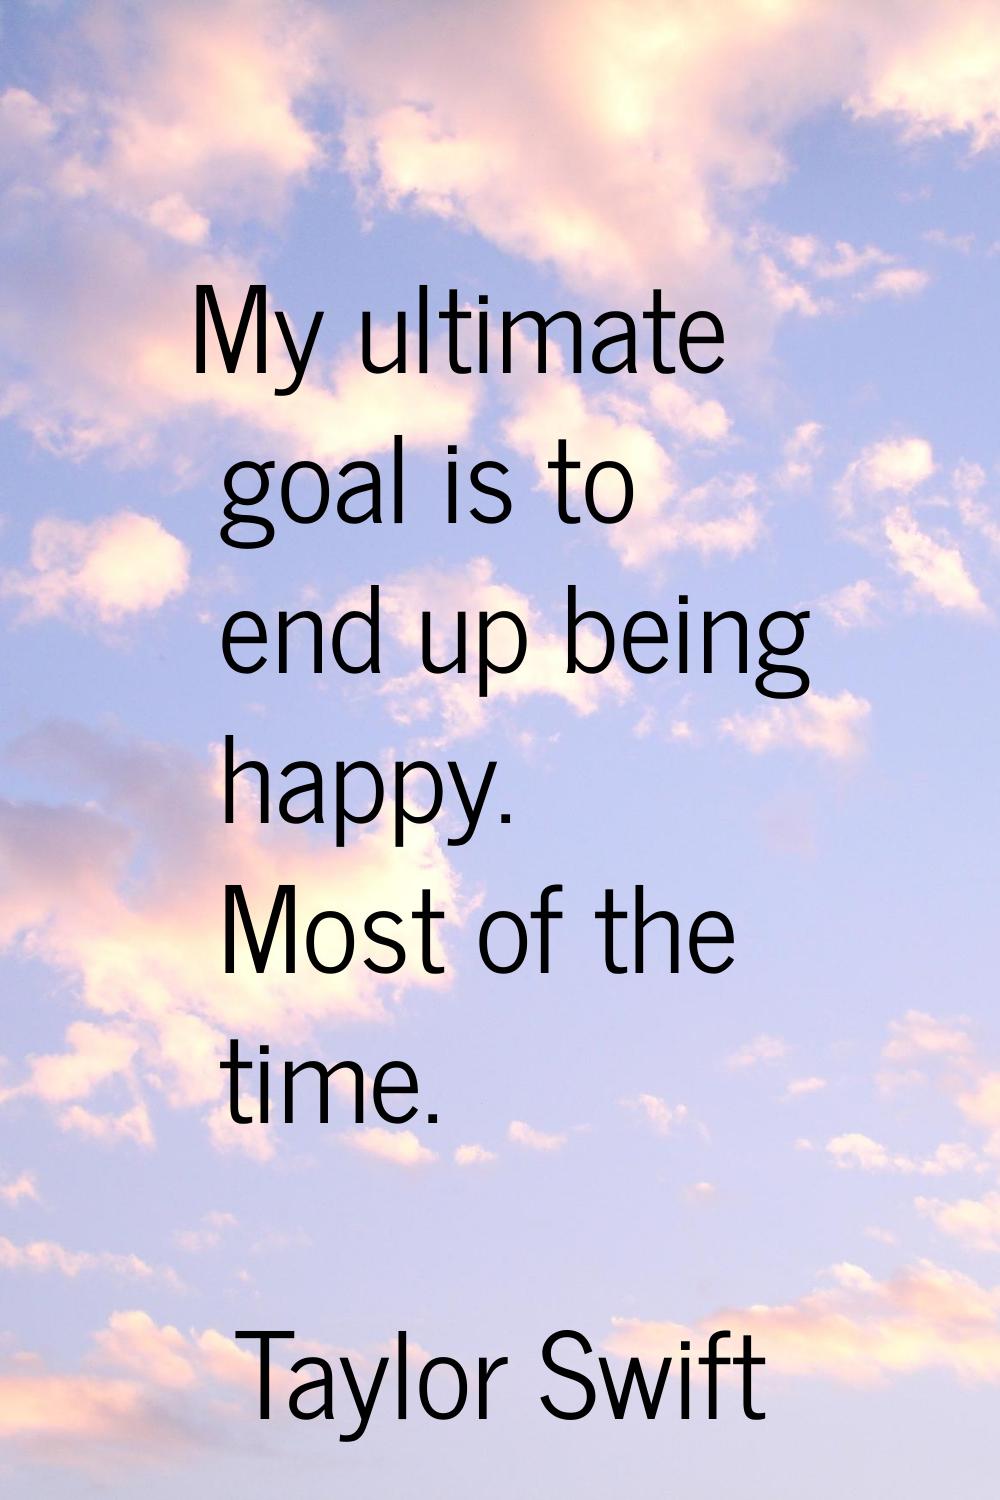 My ultimate goal is to end up being happy. Most of the time.